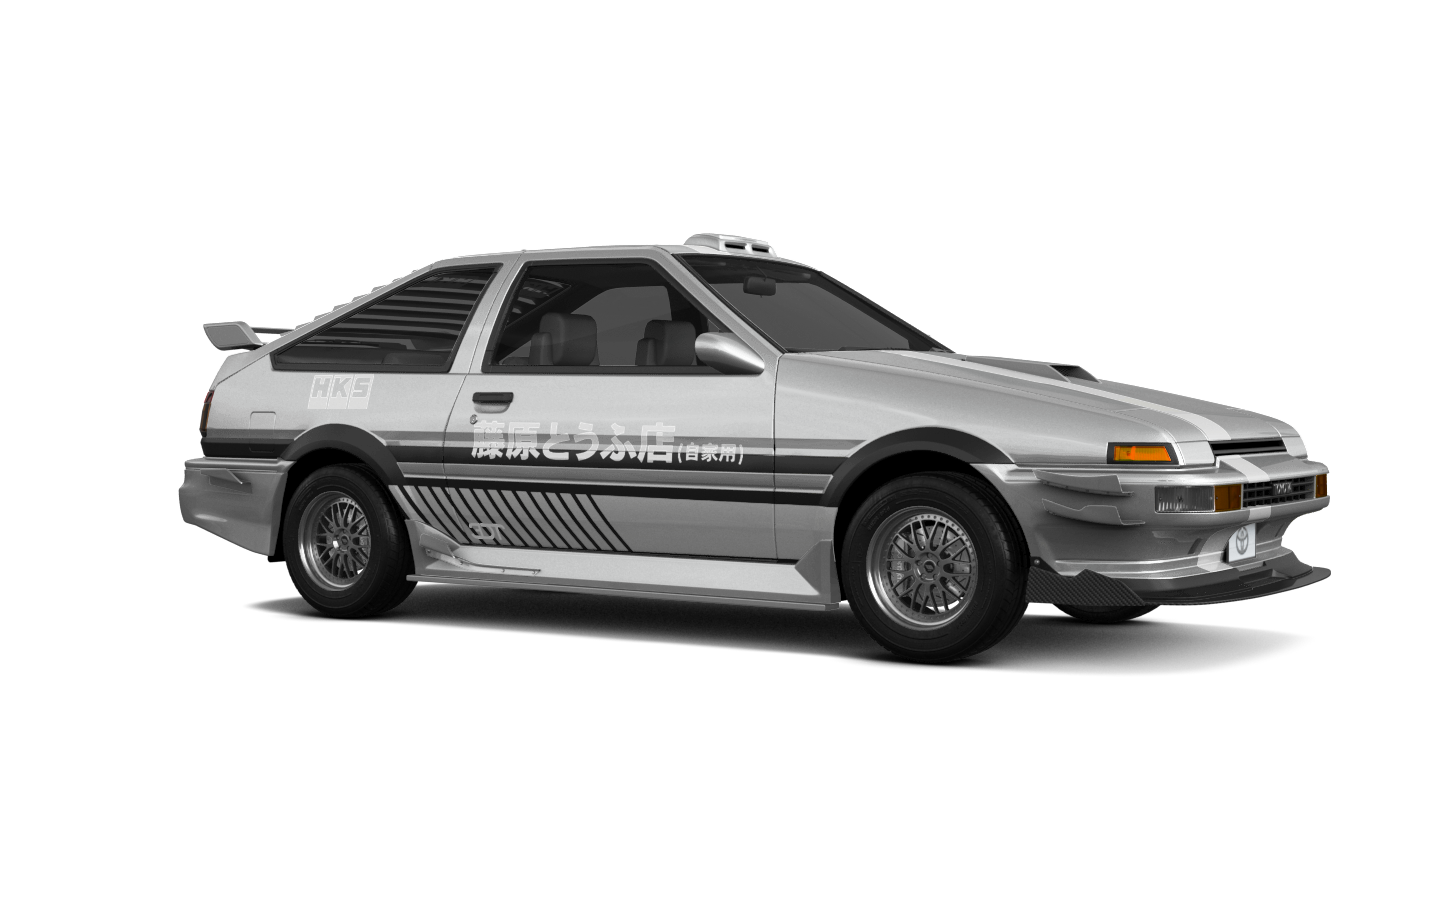 Toyota AE86 Transparent PNG